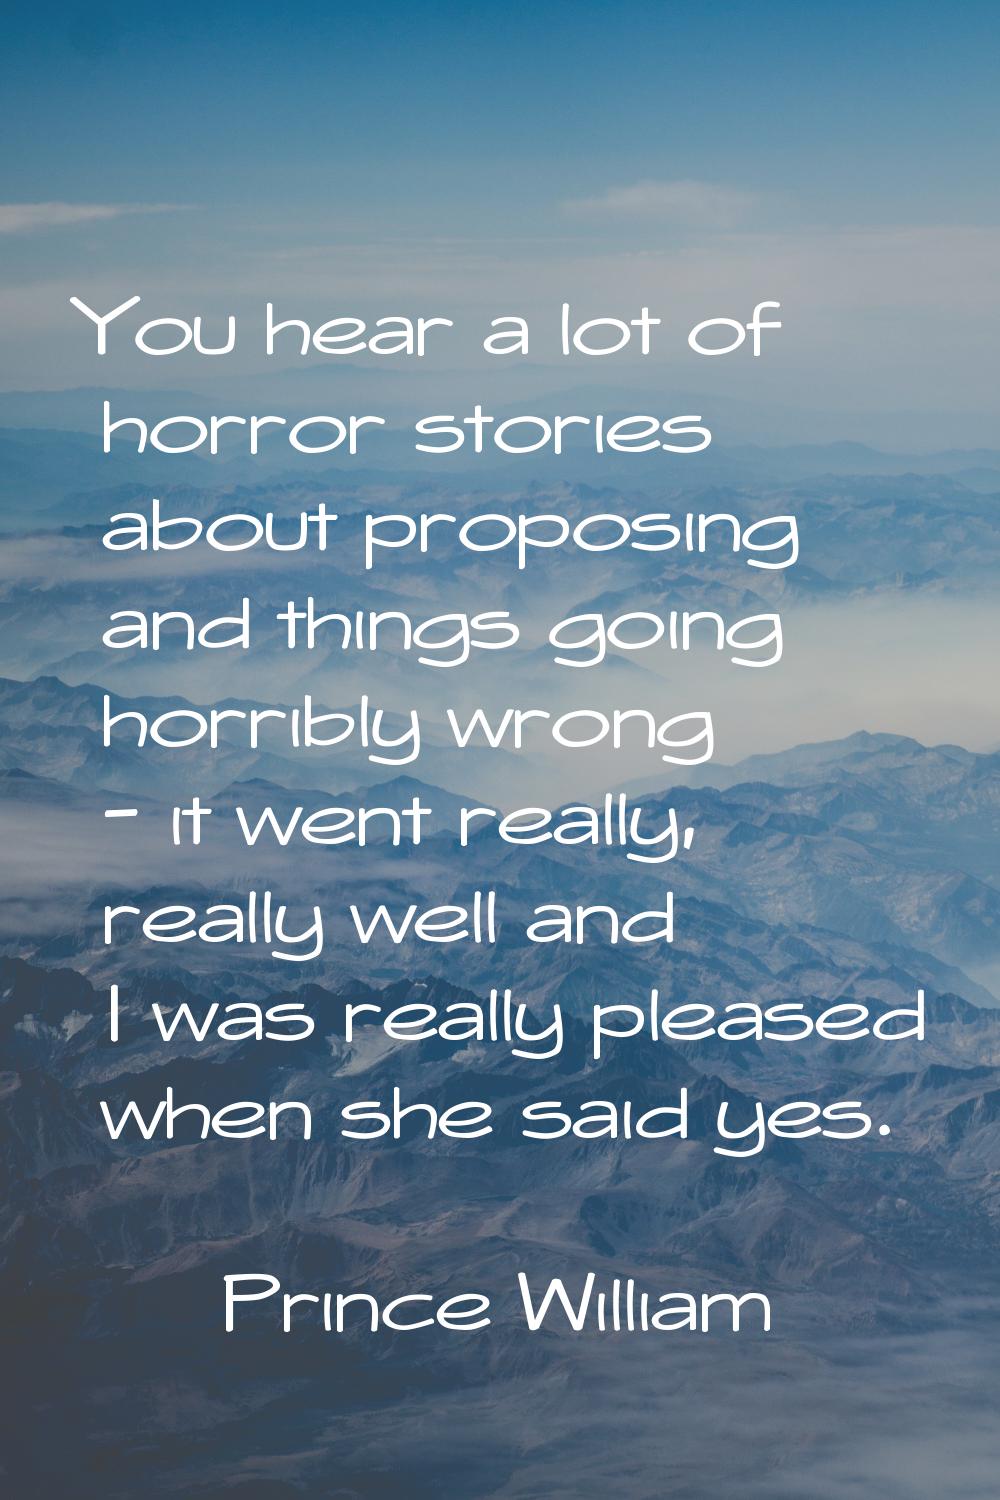 You hear a lot of horror stories about proposing and things going horribly wrong - it went really, 